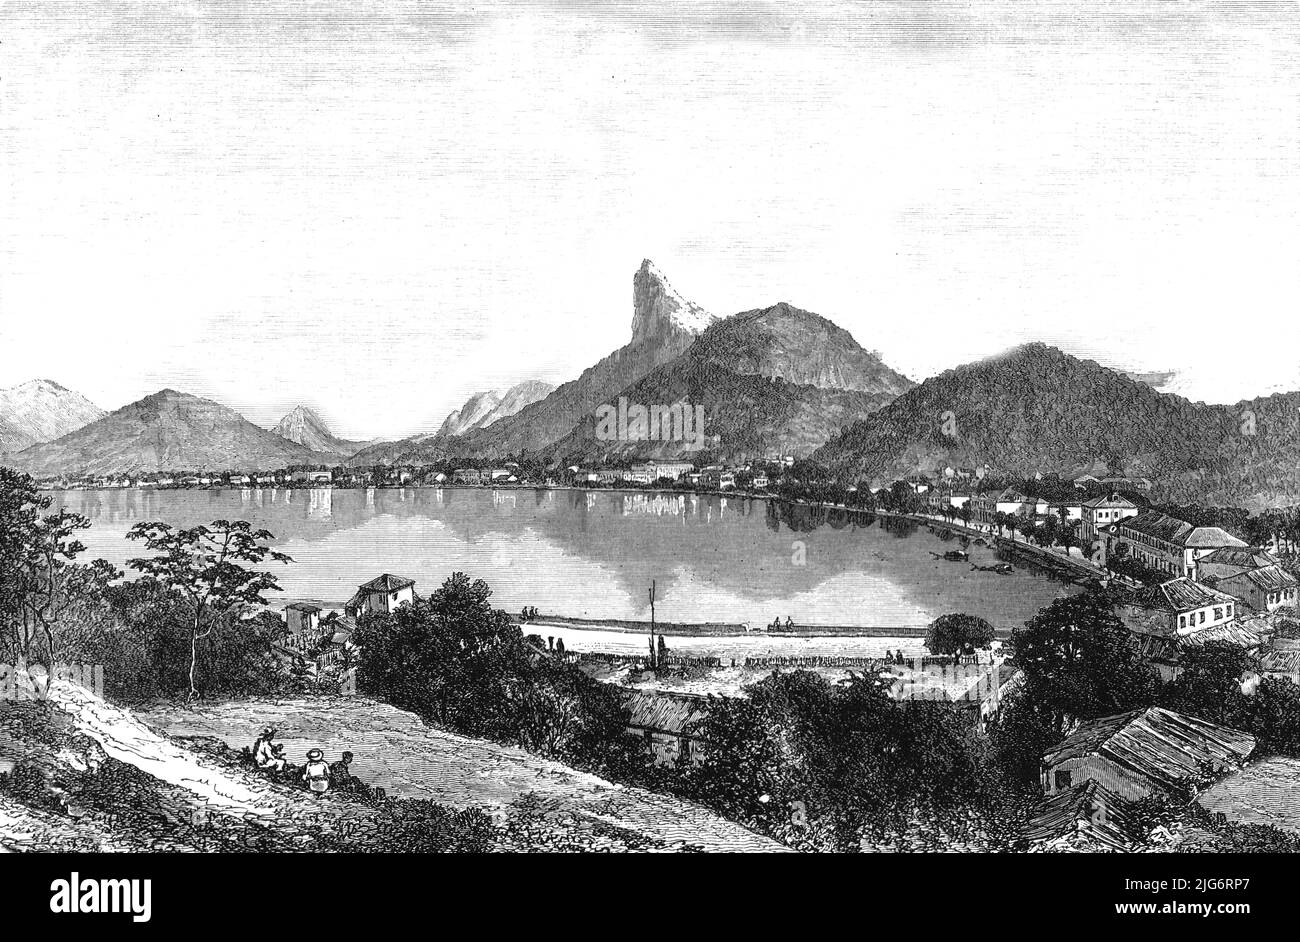 'Botafogo Bay and the Corcovado; Rio De Janeiro and the Organ Mountains', 1875. [Waterfront neighbourhood in Rio, Brazil]. From, 'Illustrated Travels' by H.W. Bates. [Cassell, Petter, and Galpin, c1880, London] Belle Sauvage Works.London E.C. Stock Photo